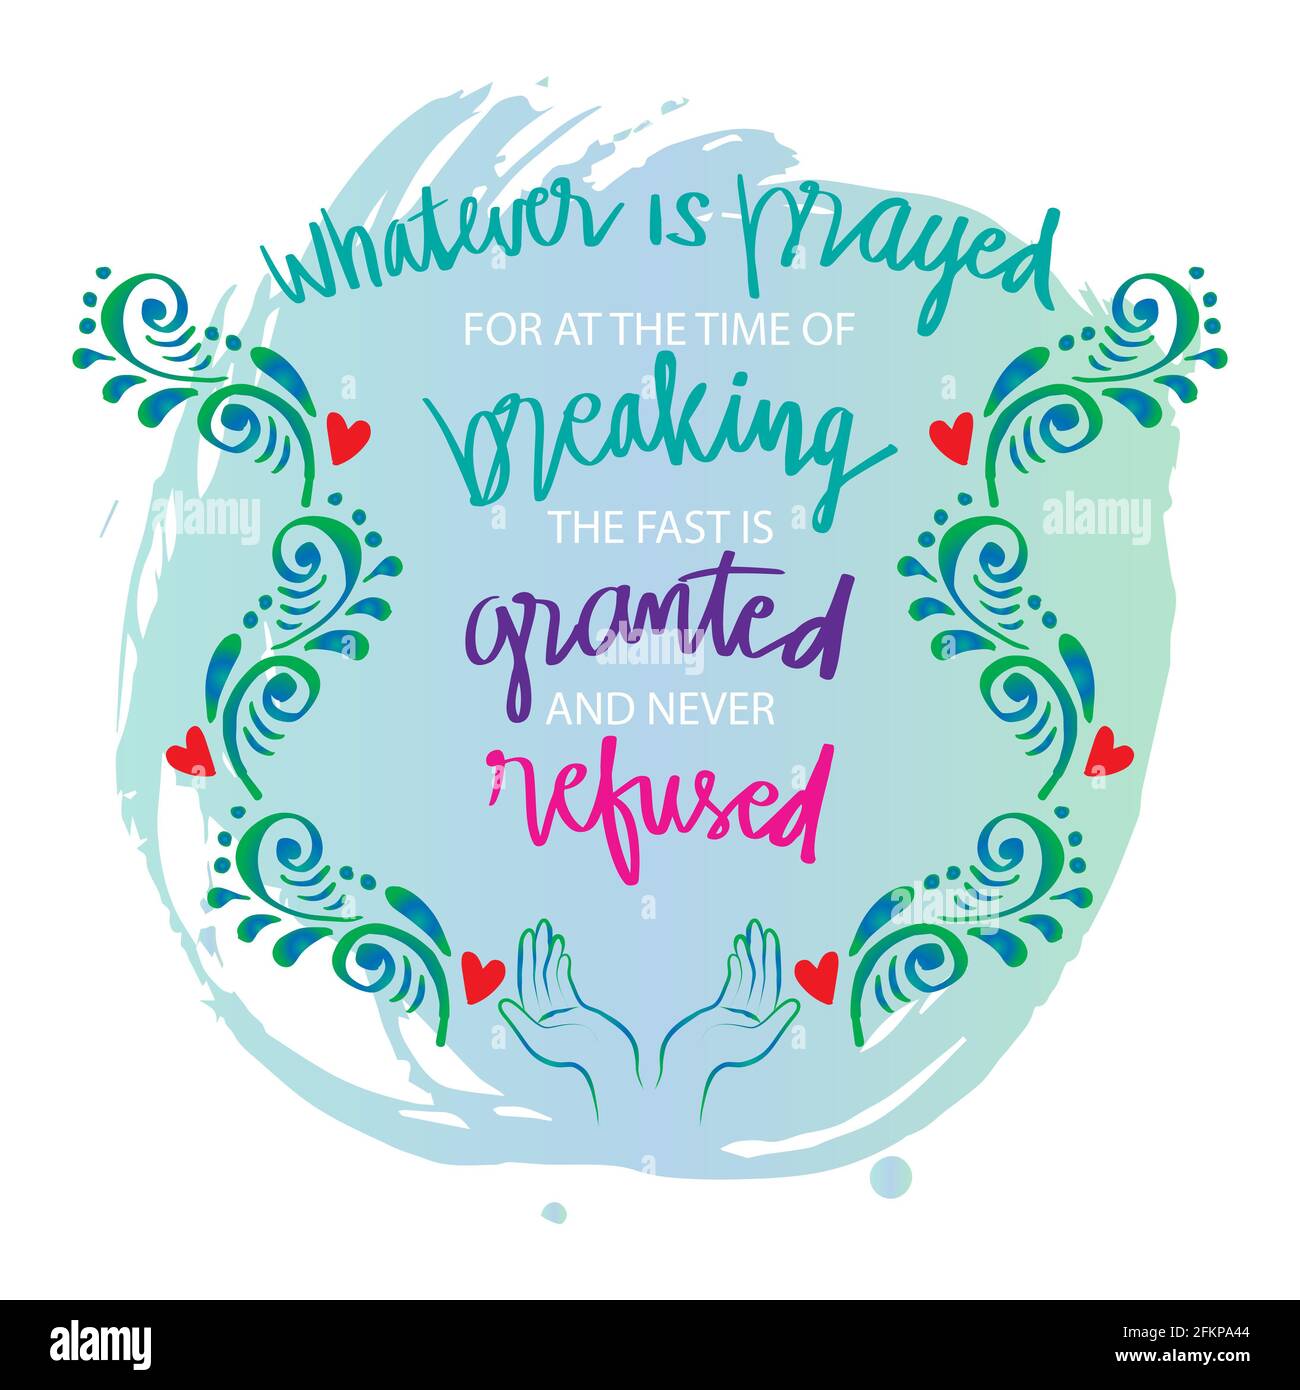 Whatever is prayed for at the time of breaking the fast is granted and never refused. Ramadan quote. Stock Photo